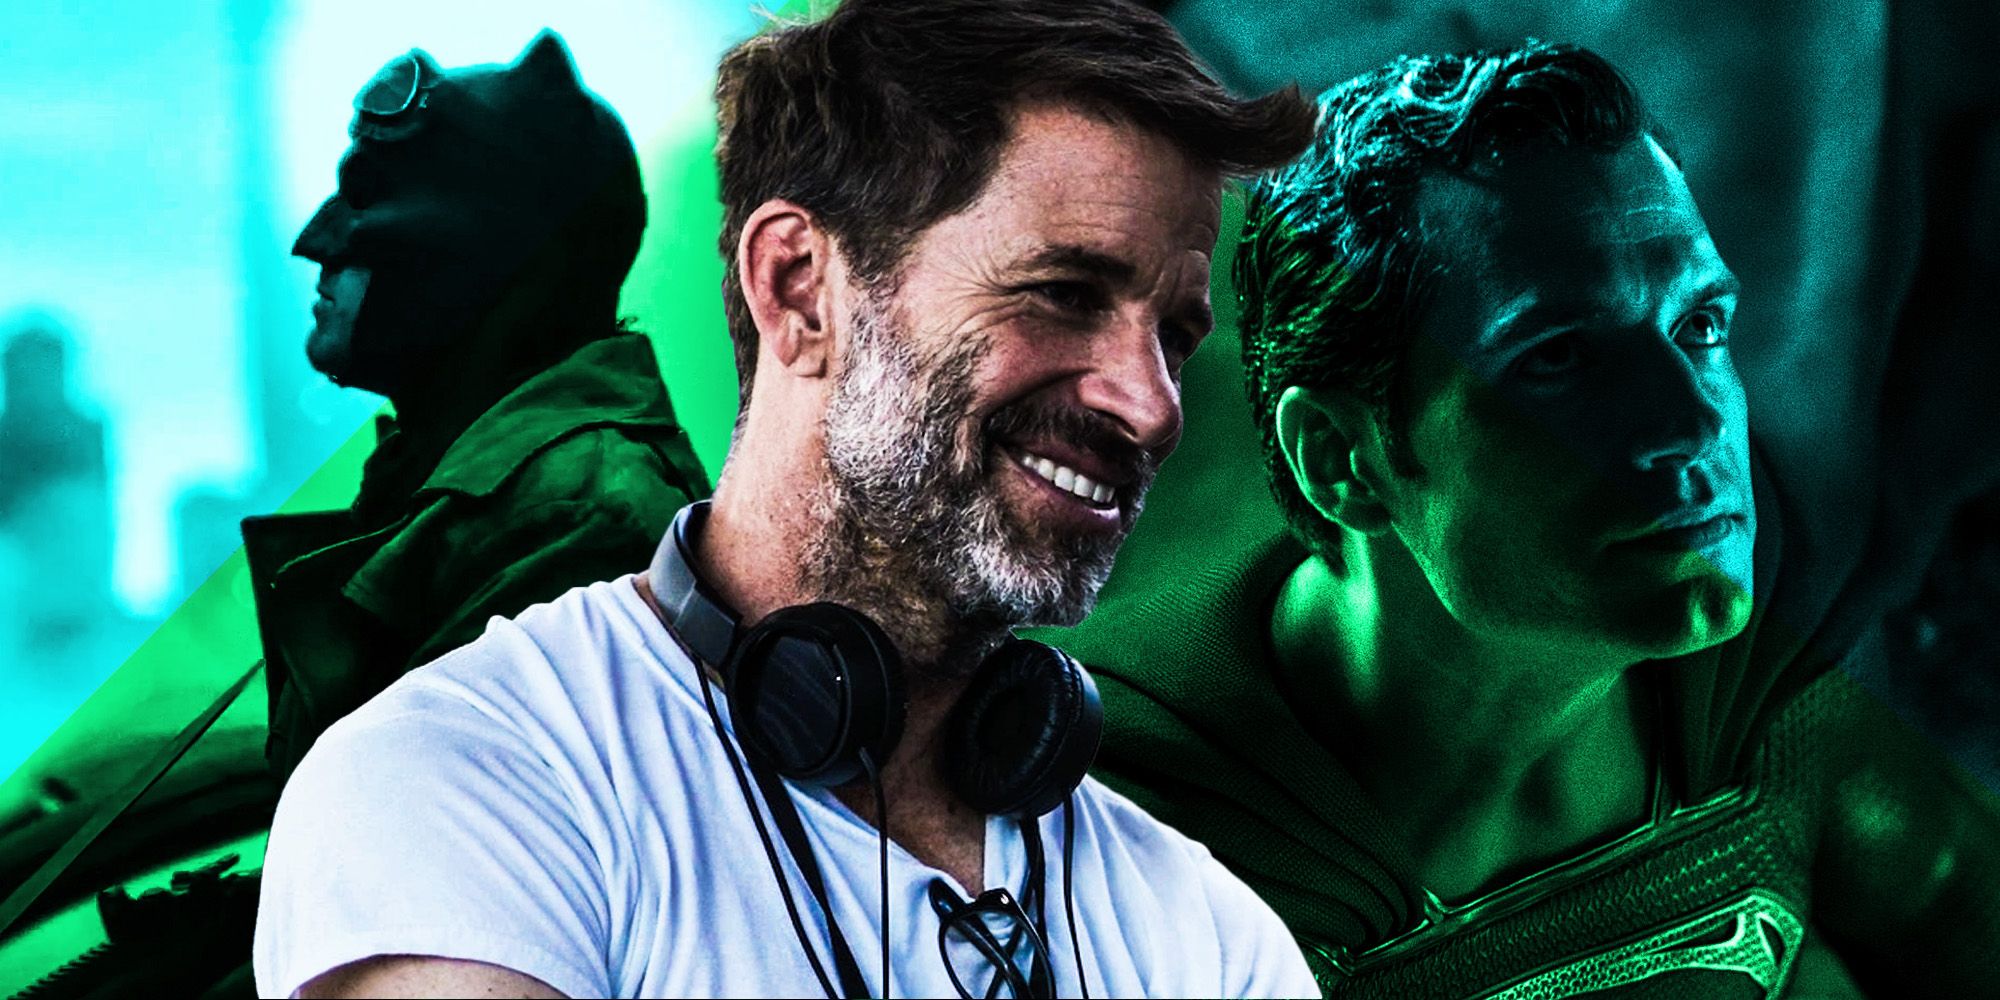 Zack snyder Justice league 2 Justice league 3 differenct genre of DC Films superman knightmare